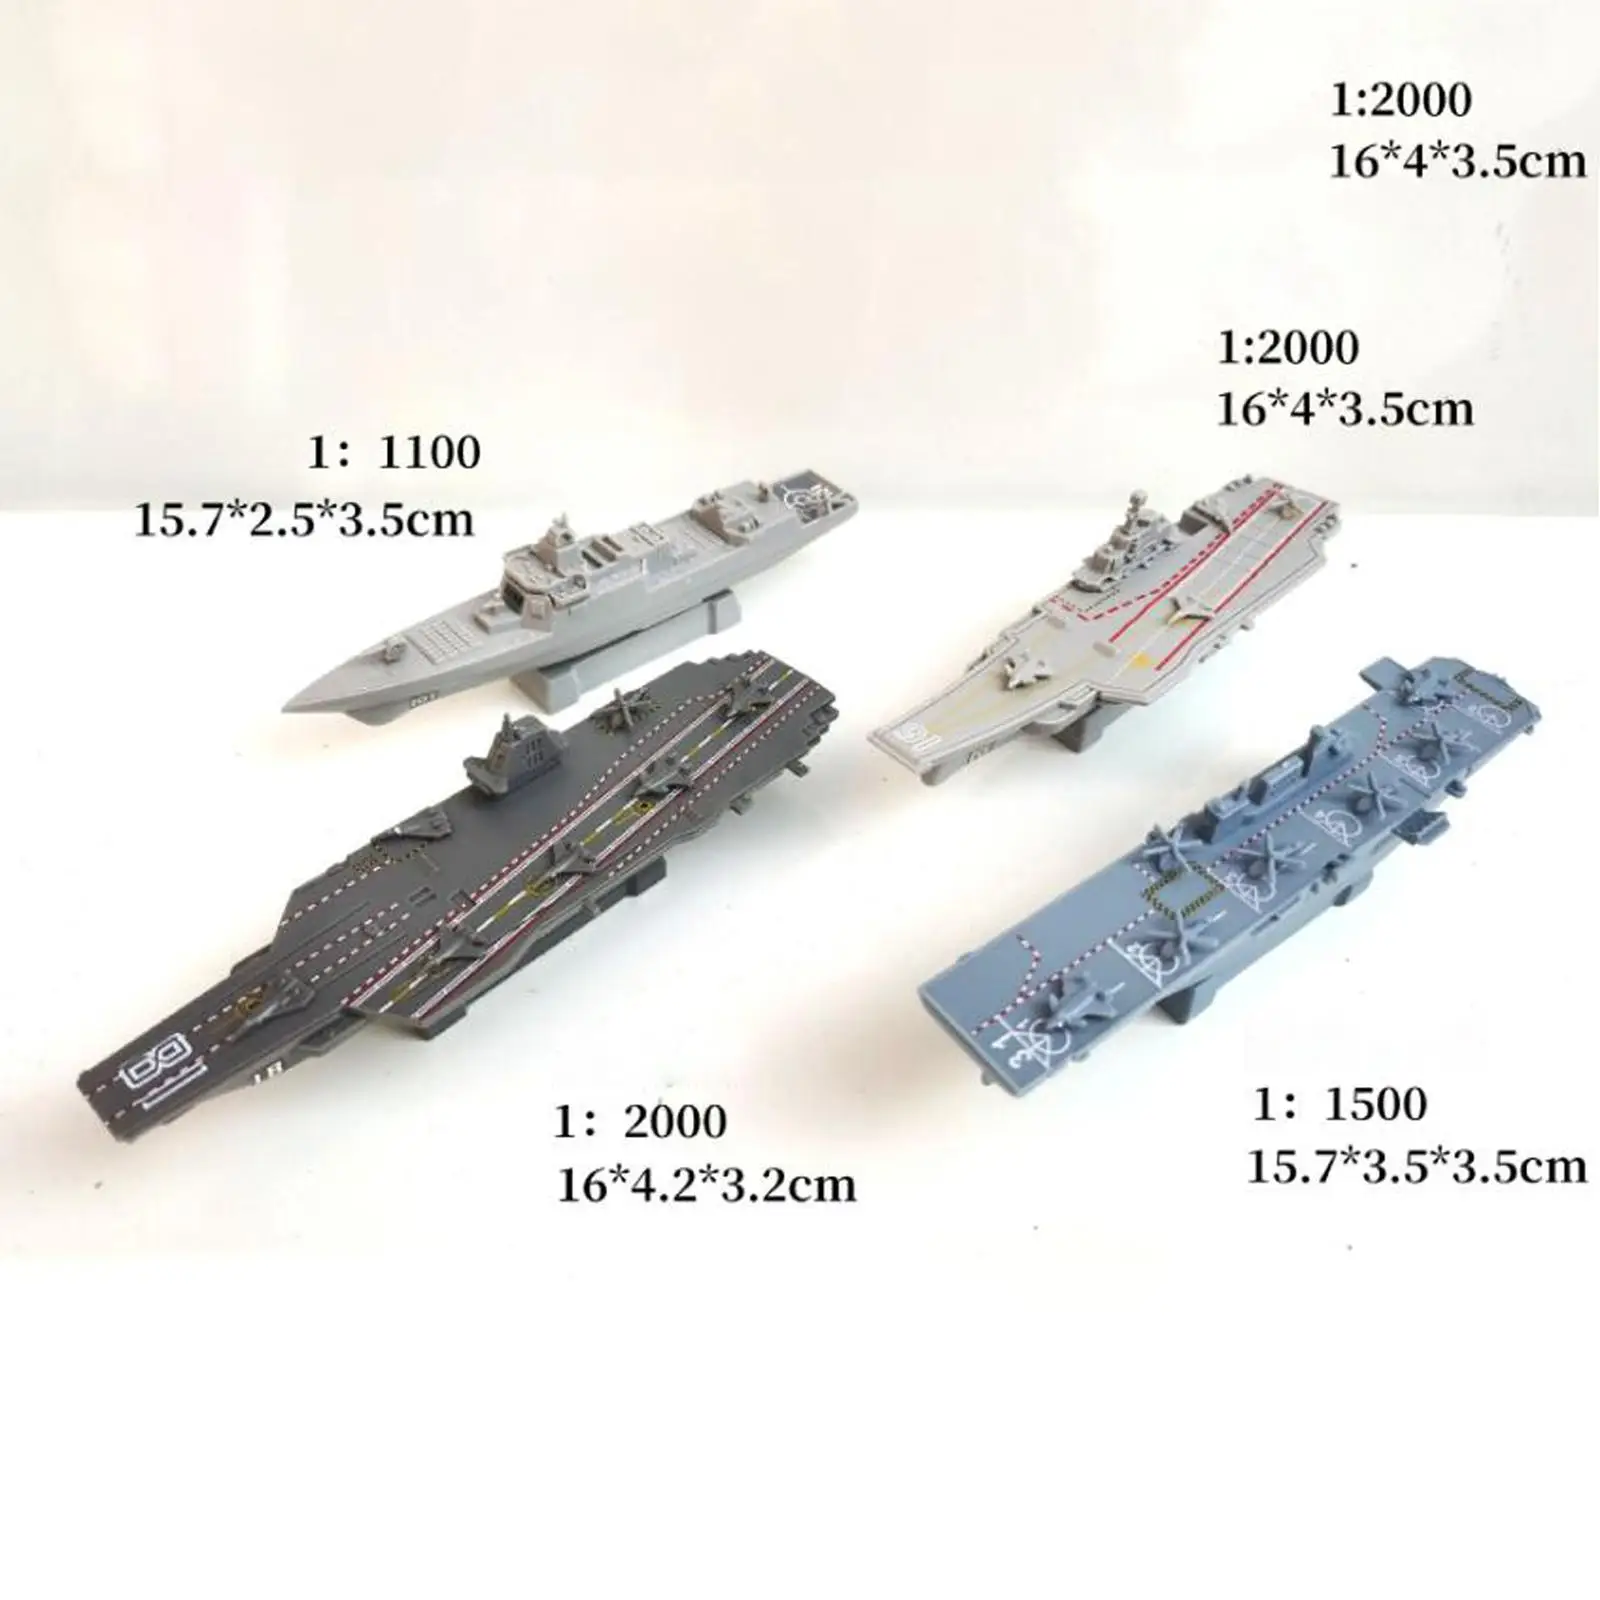 4x 4D Assembled Ship Model Aircraft Carrier Model for Boys Collectibles Kids